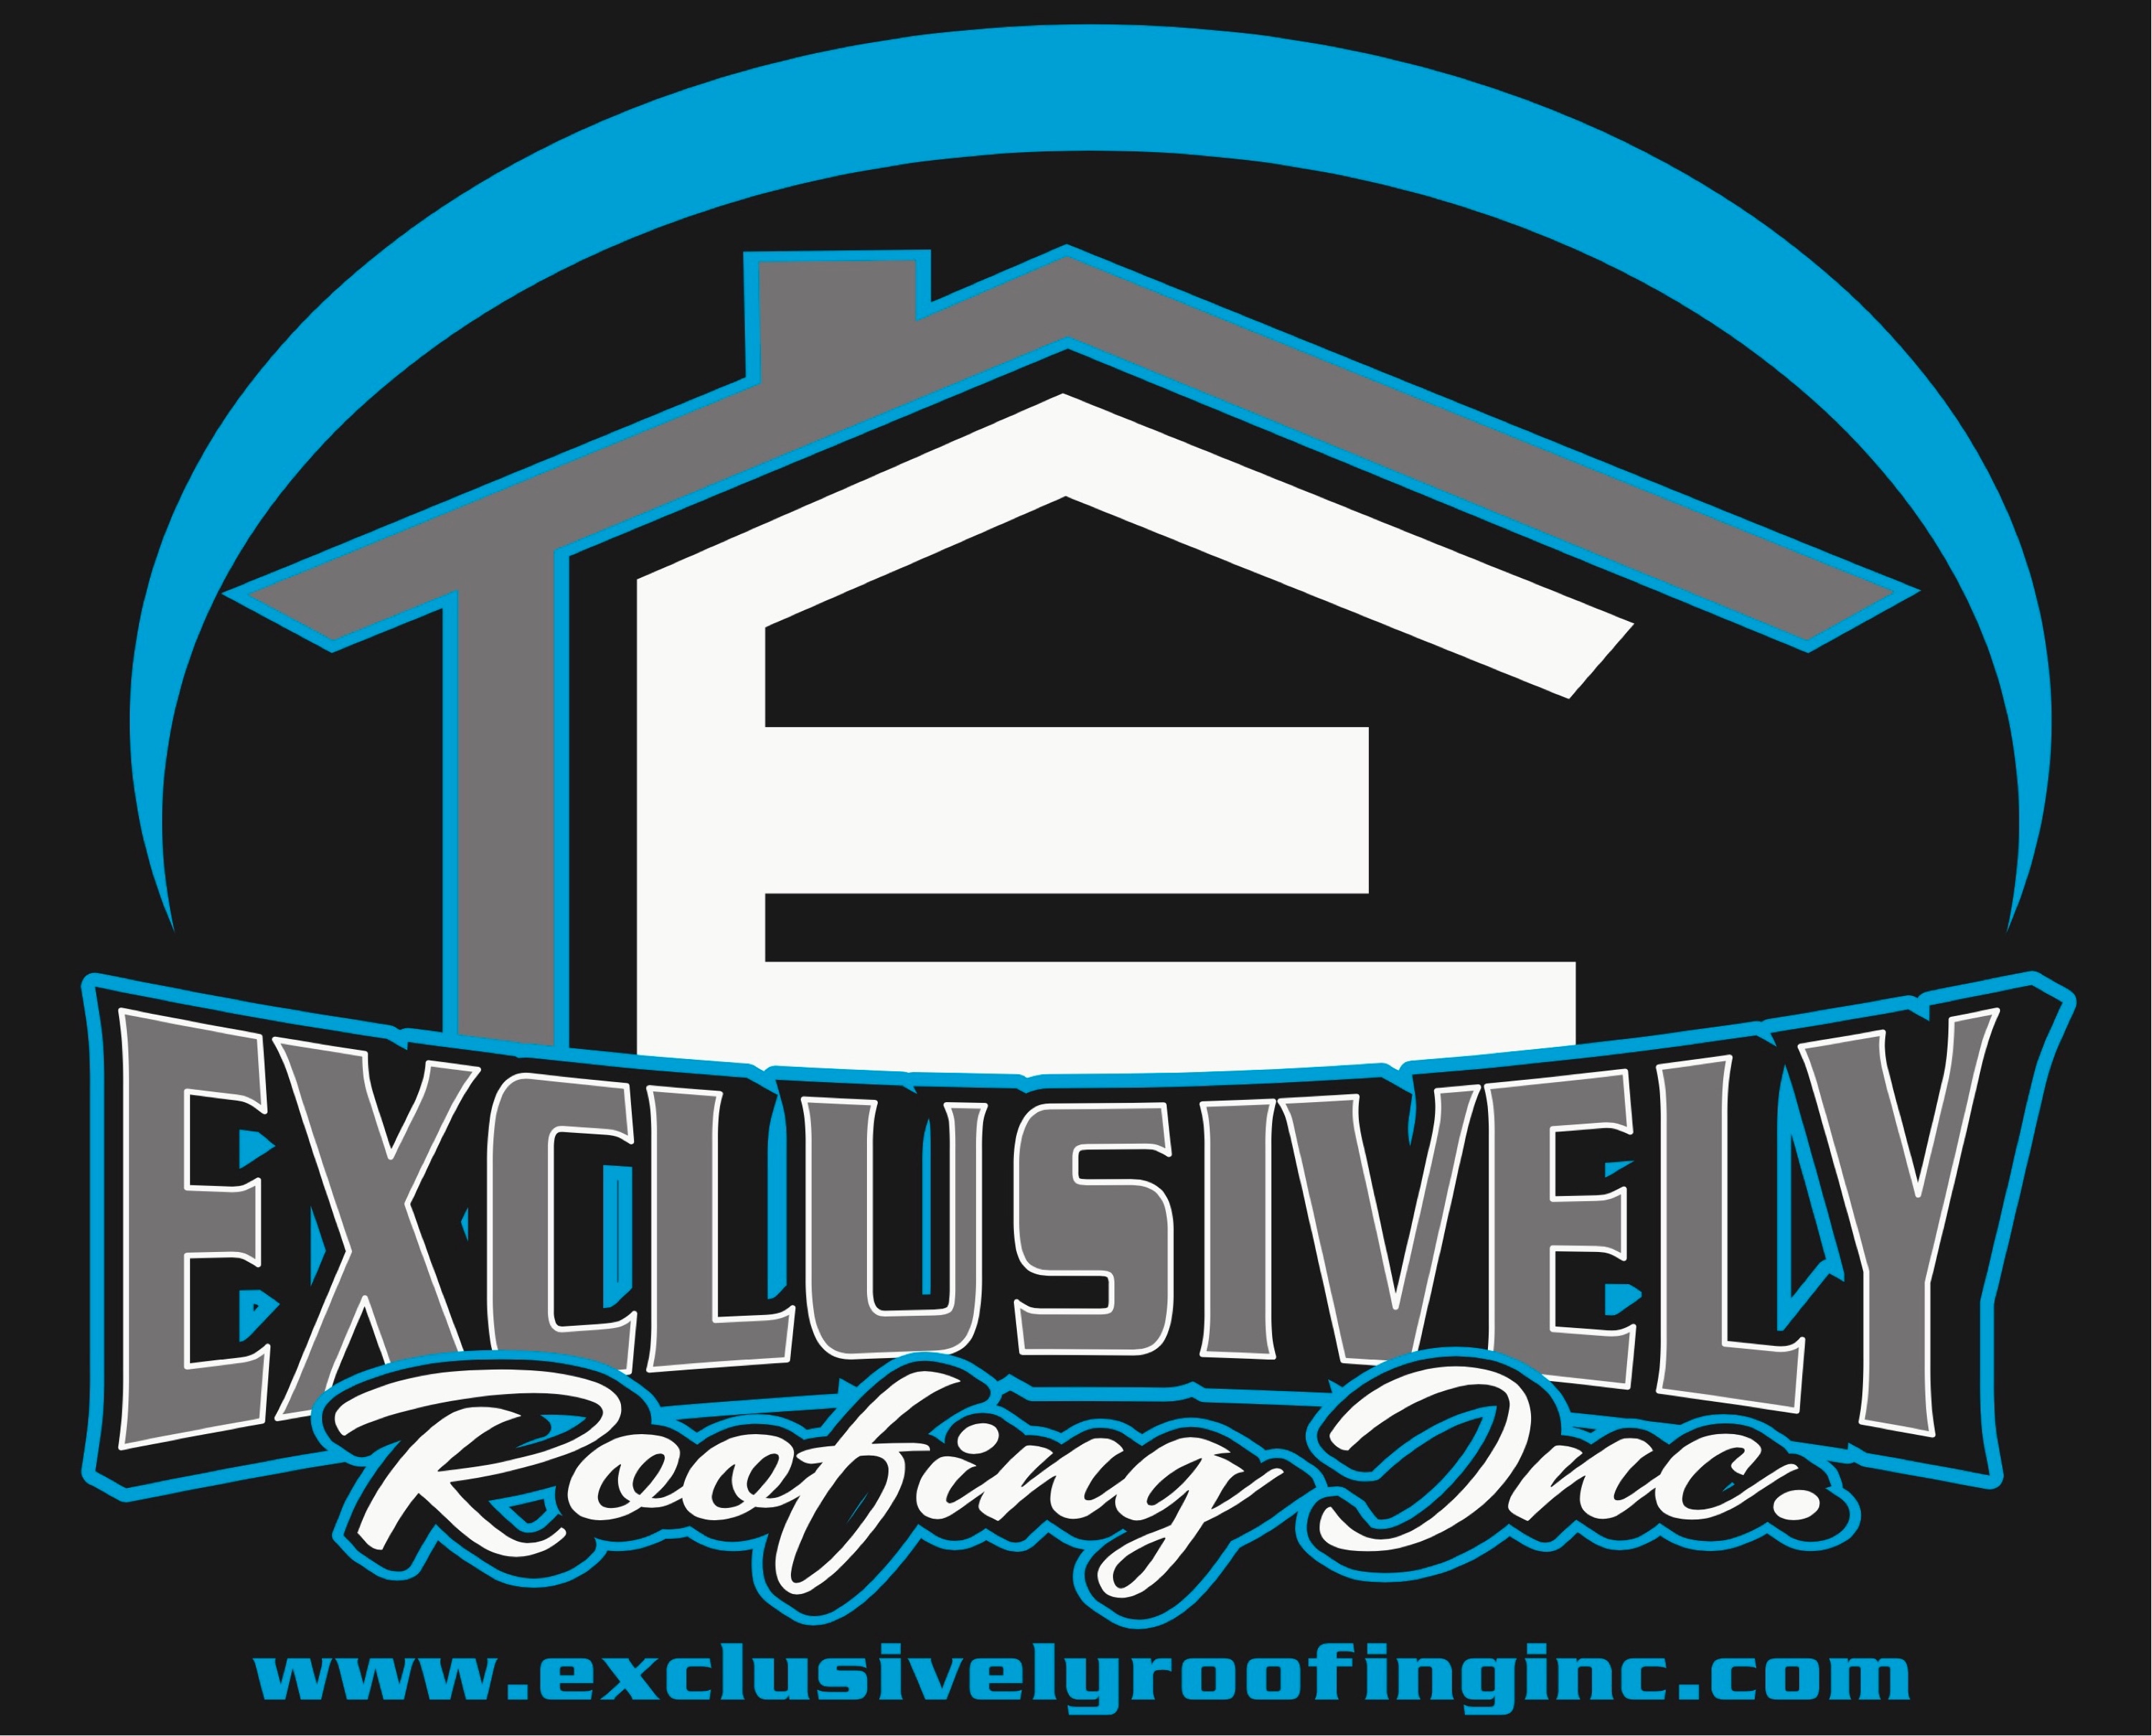 Exclusively Roofing, Inc. Logo